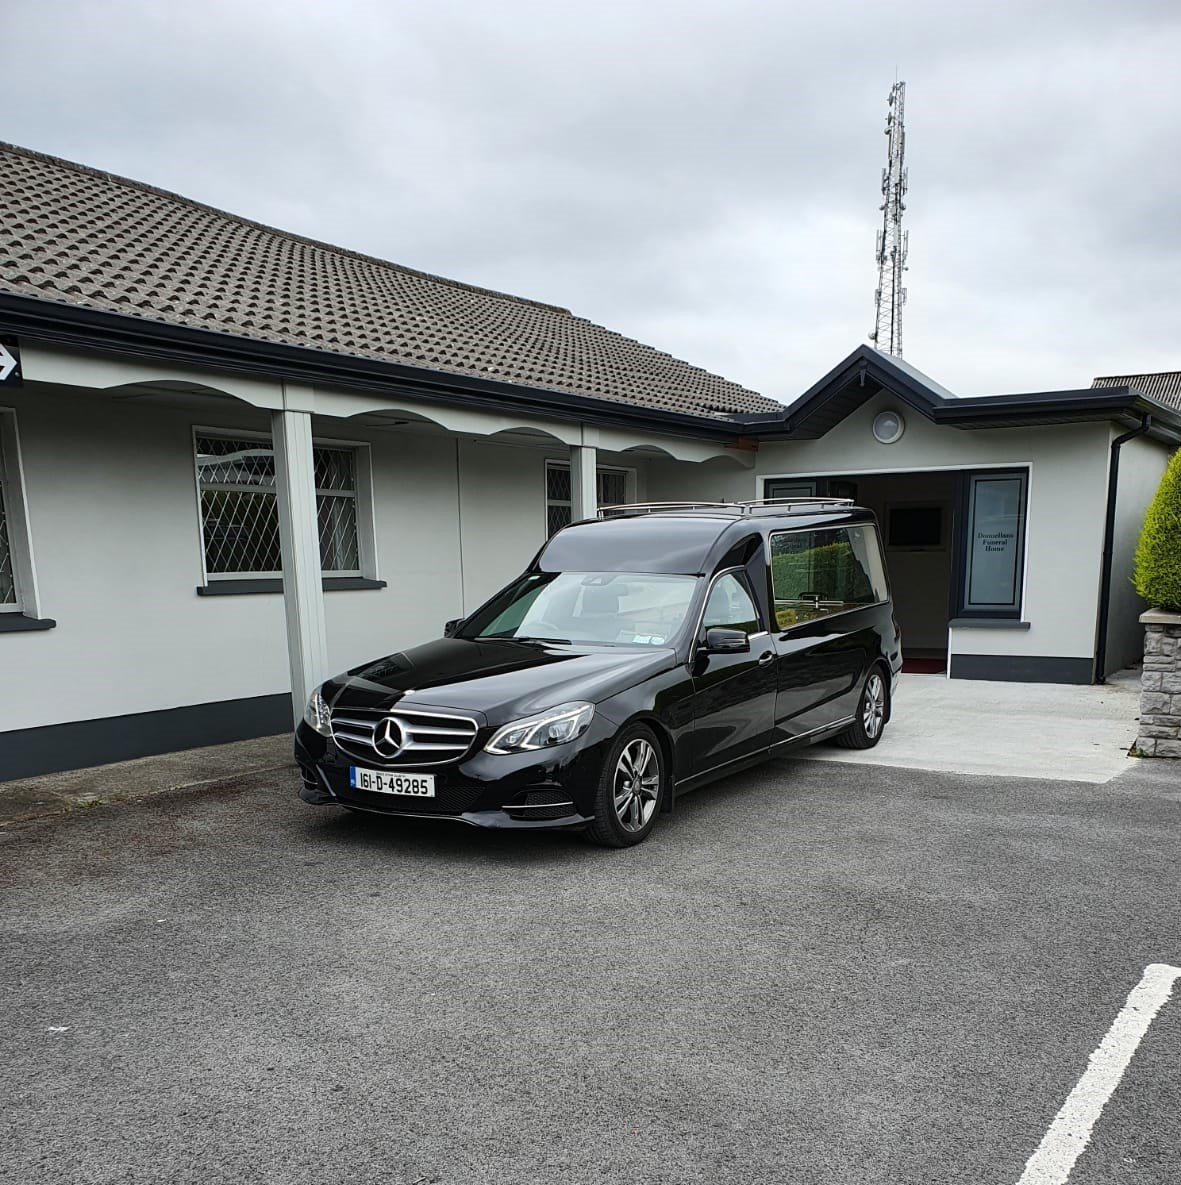 Hearse and Funeral Home